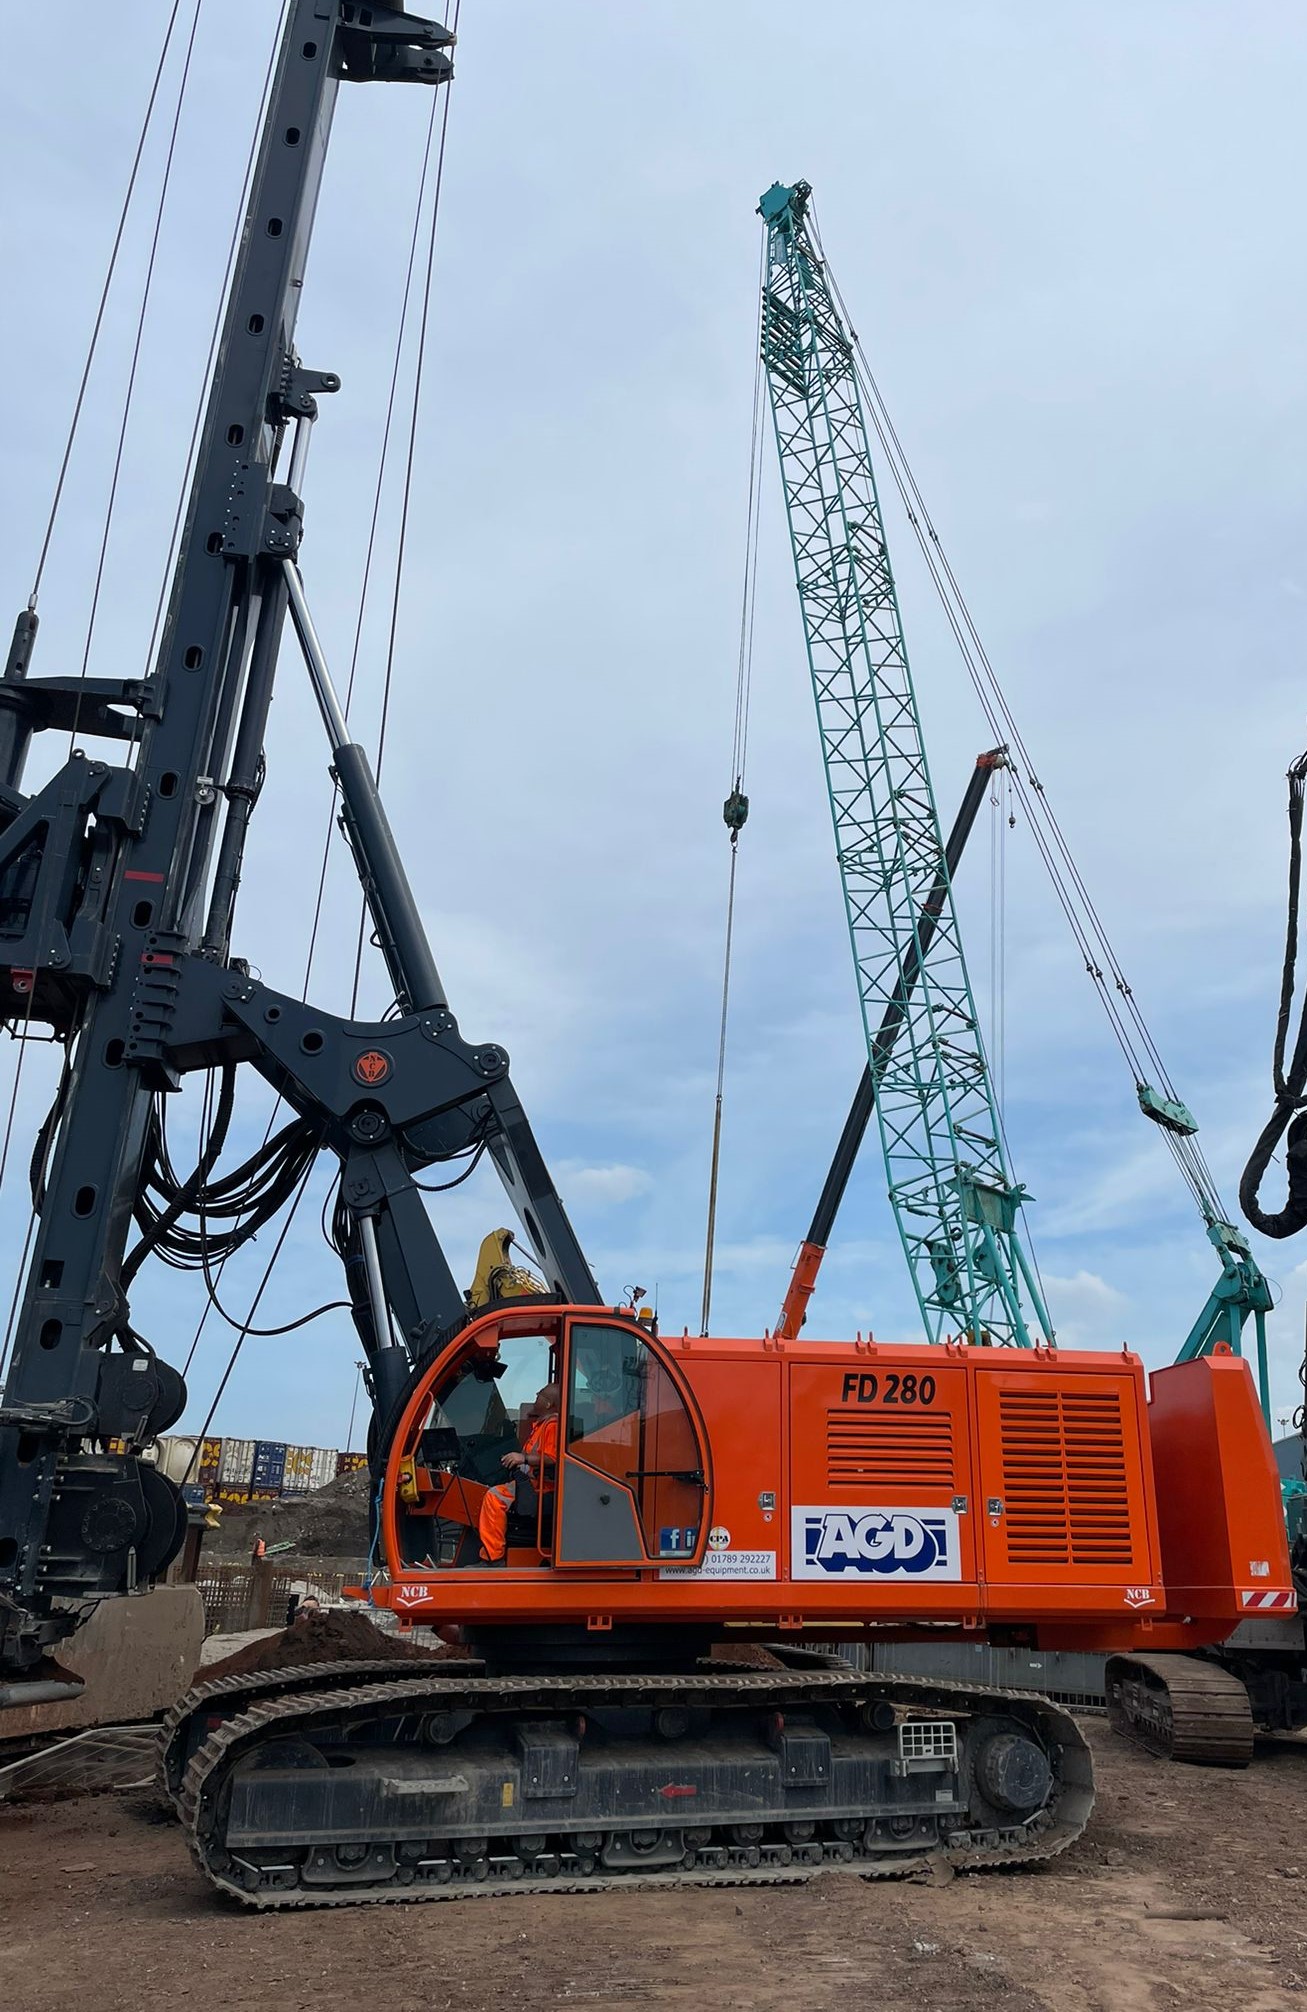 Suppliers of High-Capacity Rotary Piling Rig Hire